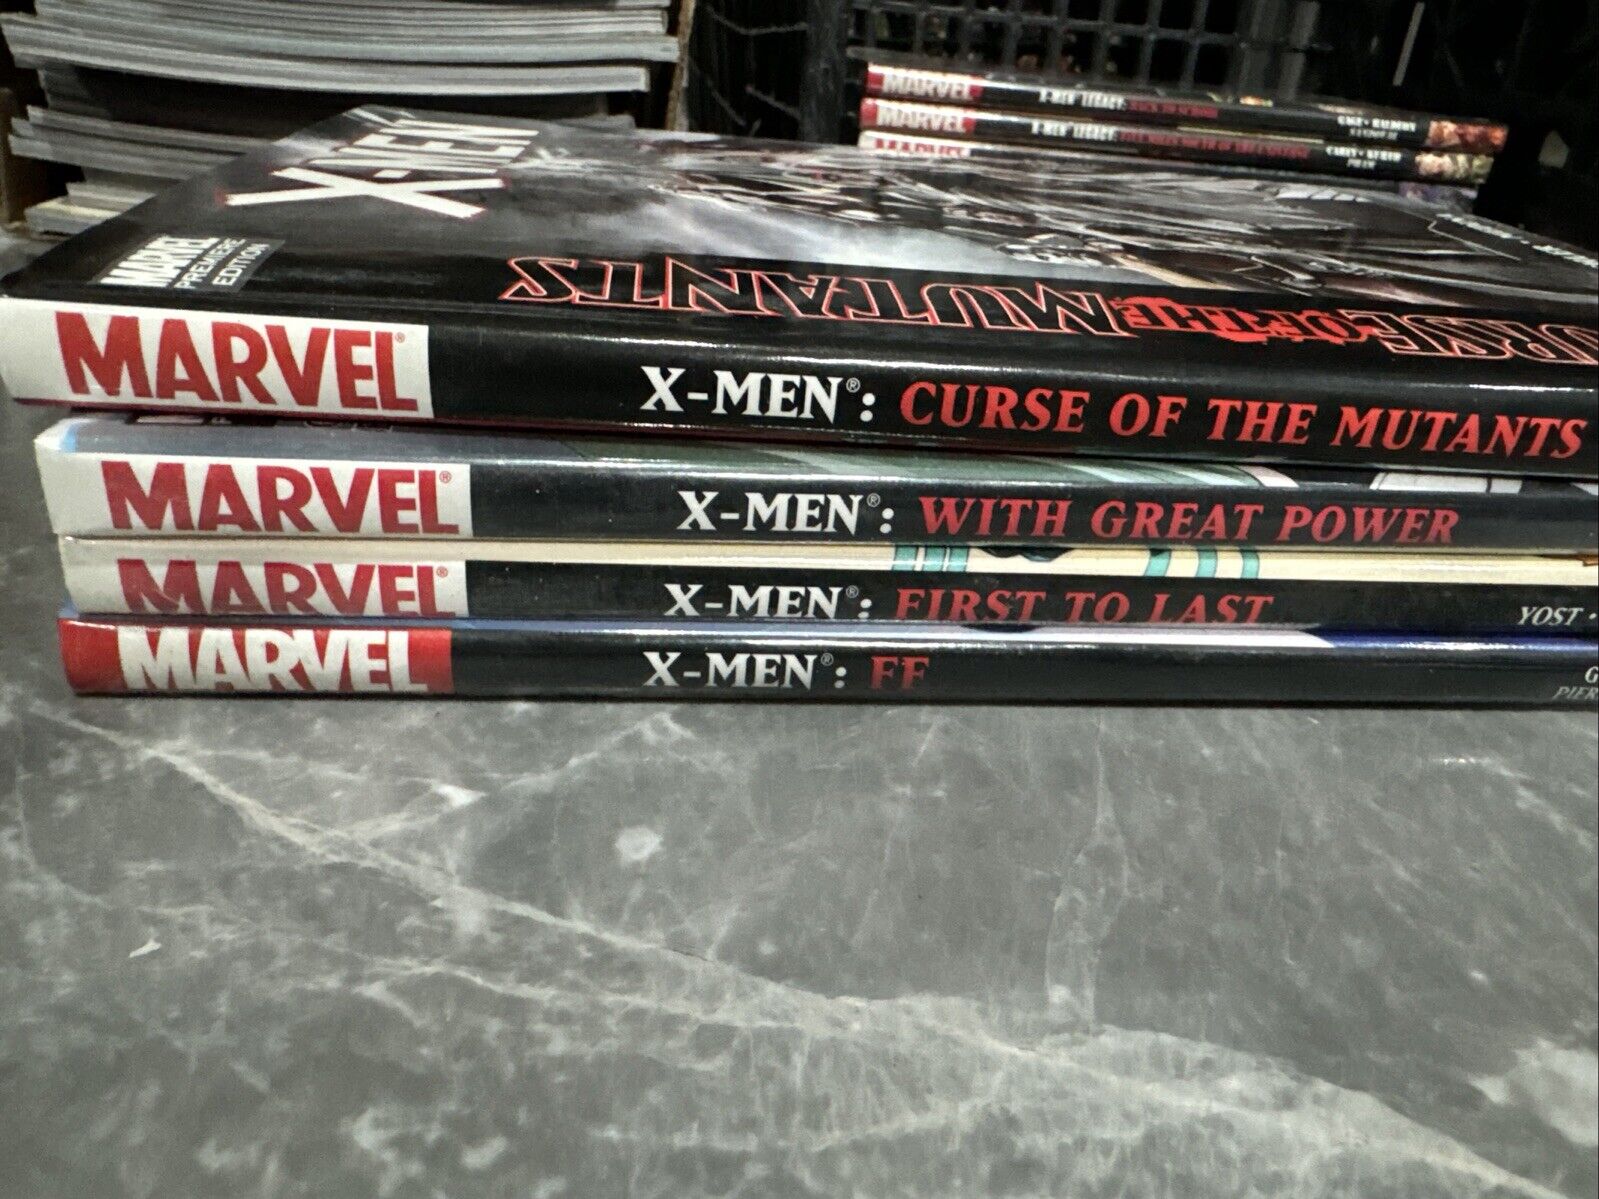 X-Men: Curse of the Mutants, With Great Power , First to Last, Ff